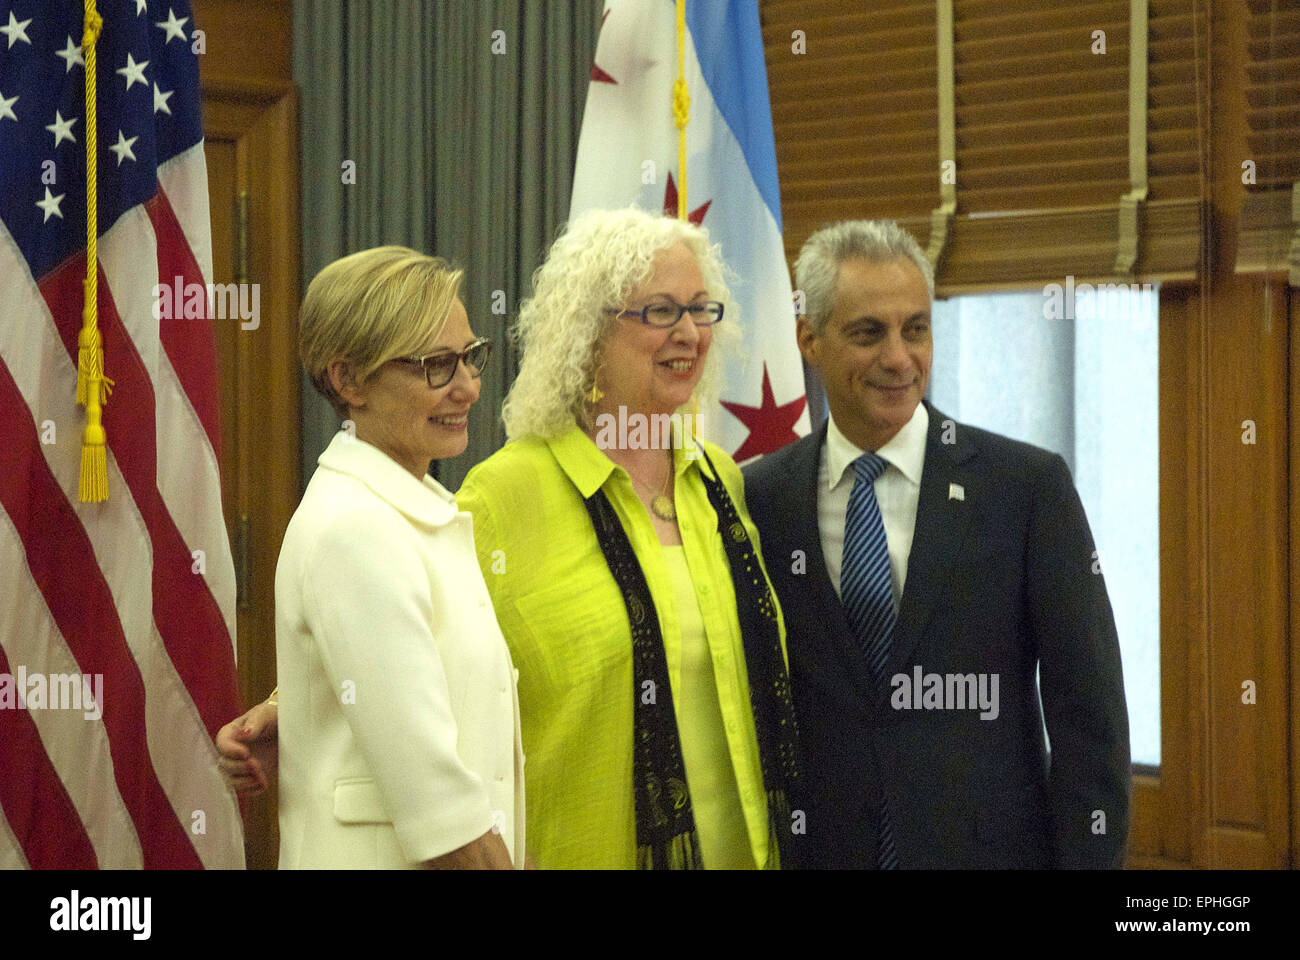 Chicago, Illinois, USA. 18th May, 2015. Mayor Rahm Emanuel with his wife Amy Rule greet the public on inauguration day May 18, 2015 for the Mayor's second -four year term. Emahuel opened the doors to his office at City Hall to meet his constituents one by one. A long line of people waited to meet the couple and to pose for pictures. In the morning, the Mayor was inaugurated at the Chicago Theater sharing the stage with President Bill Clinton and the newly elected Chicago aldermen. © Karen I. Hirsch/ZUMA Wire/ZUMAPRESS.com/Alamy Live News Stock Photo